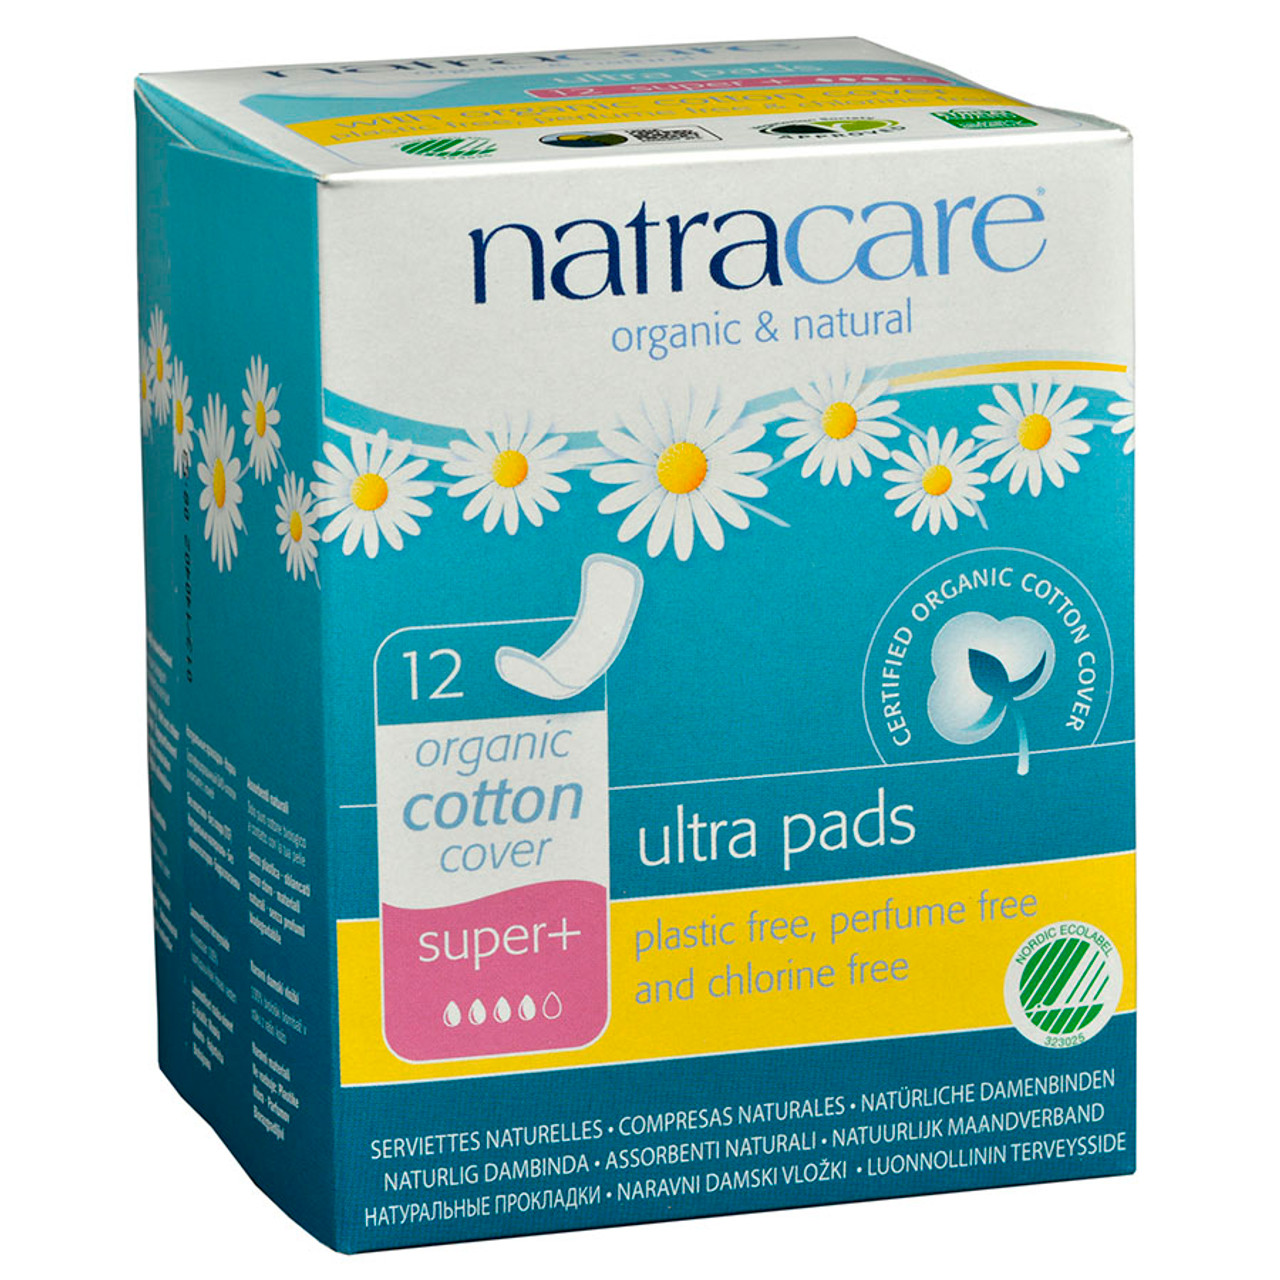 https://cdn11.bigcommerce.com/s-nuj3c/images/stencil/1280x1280/products/1032/2664/1_Natracare-Natural-Ultra-Pads-Super-Plus-12-count-Bio-degradable-Non-Chlorine-Bleached-221511-Front__15199.1627397441.jpg?c=2